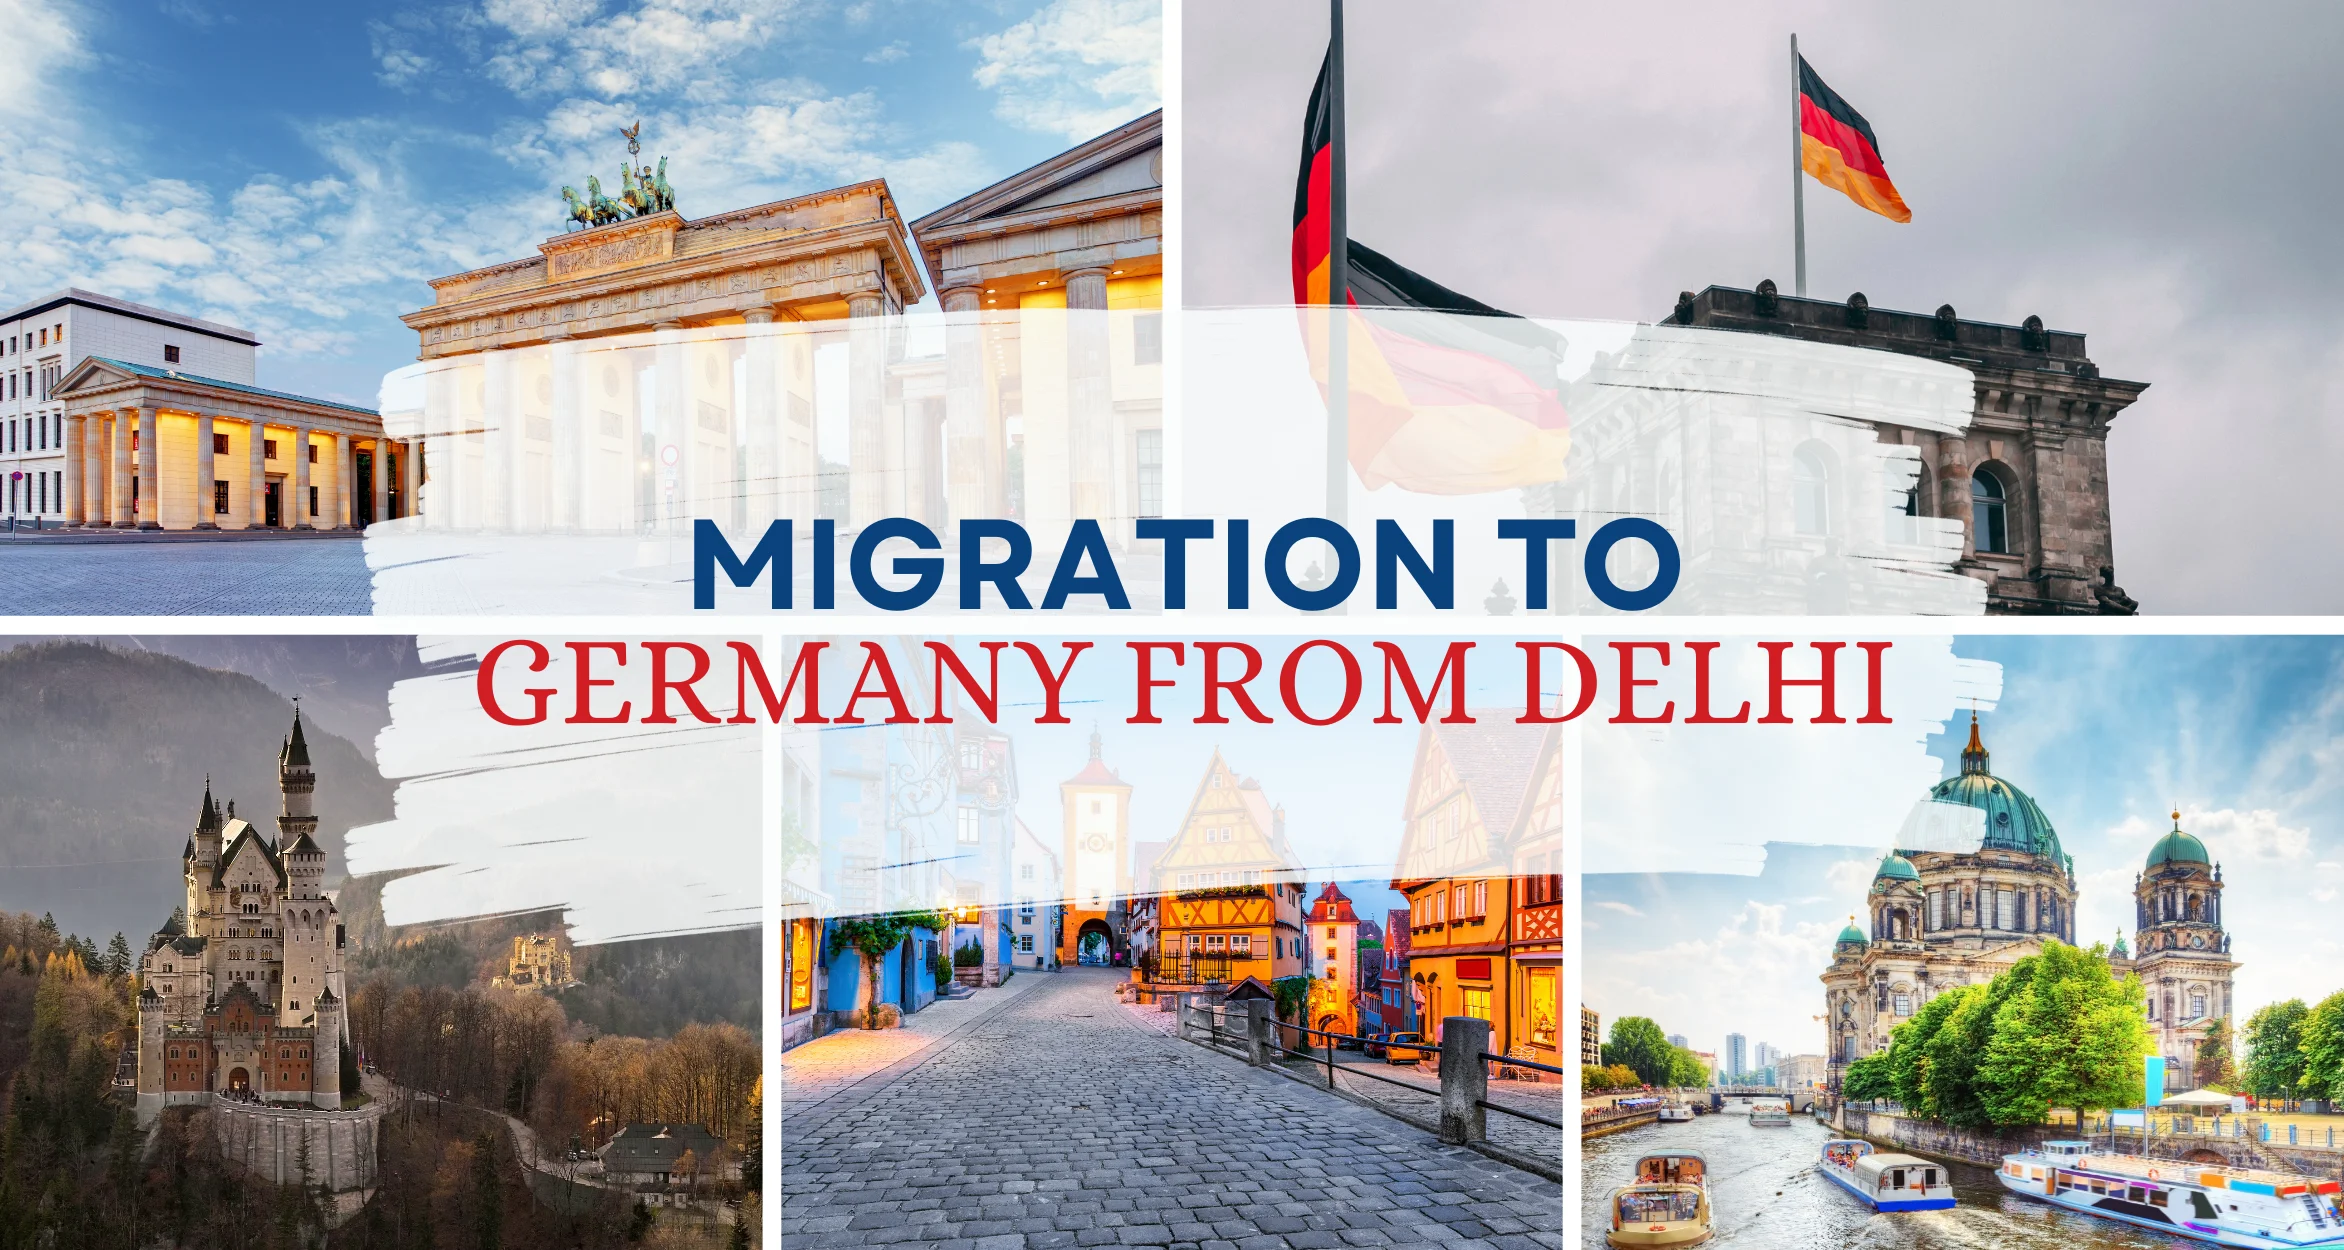 Migration to Germany from Delhi